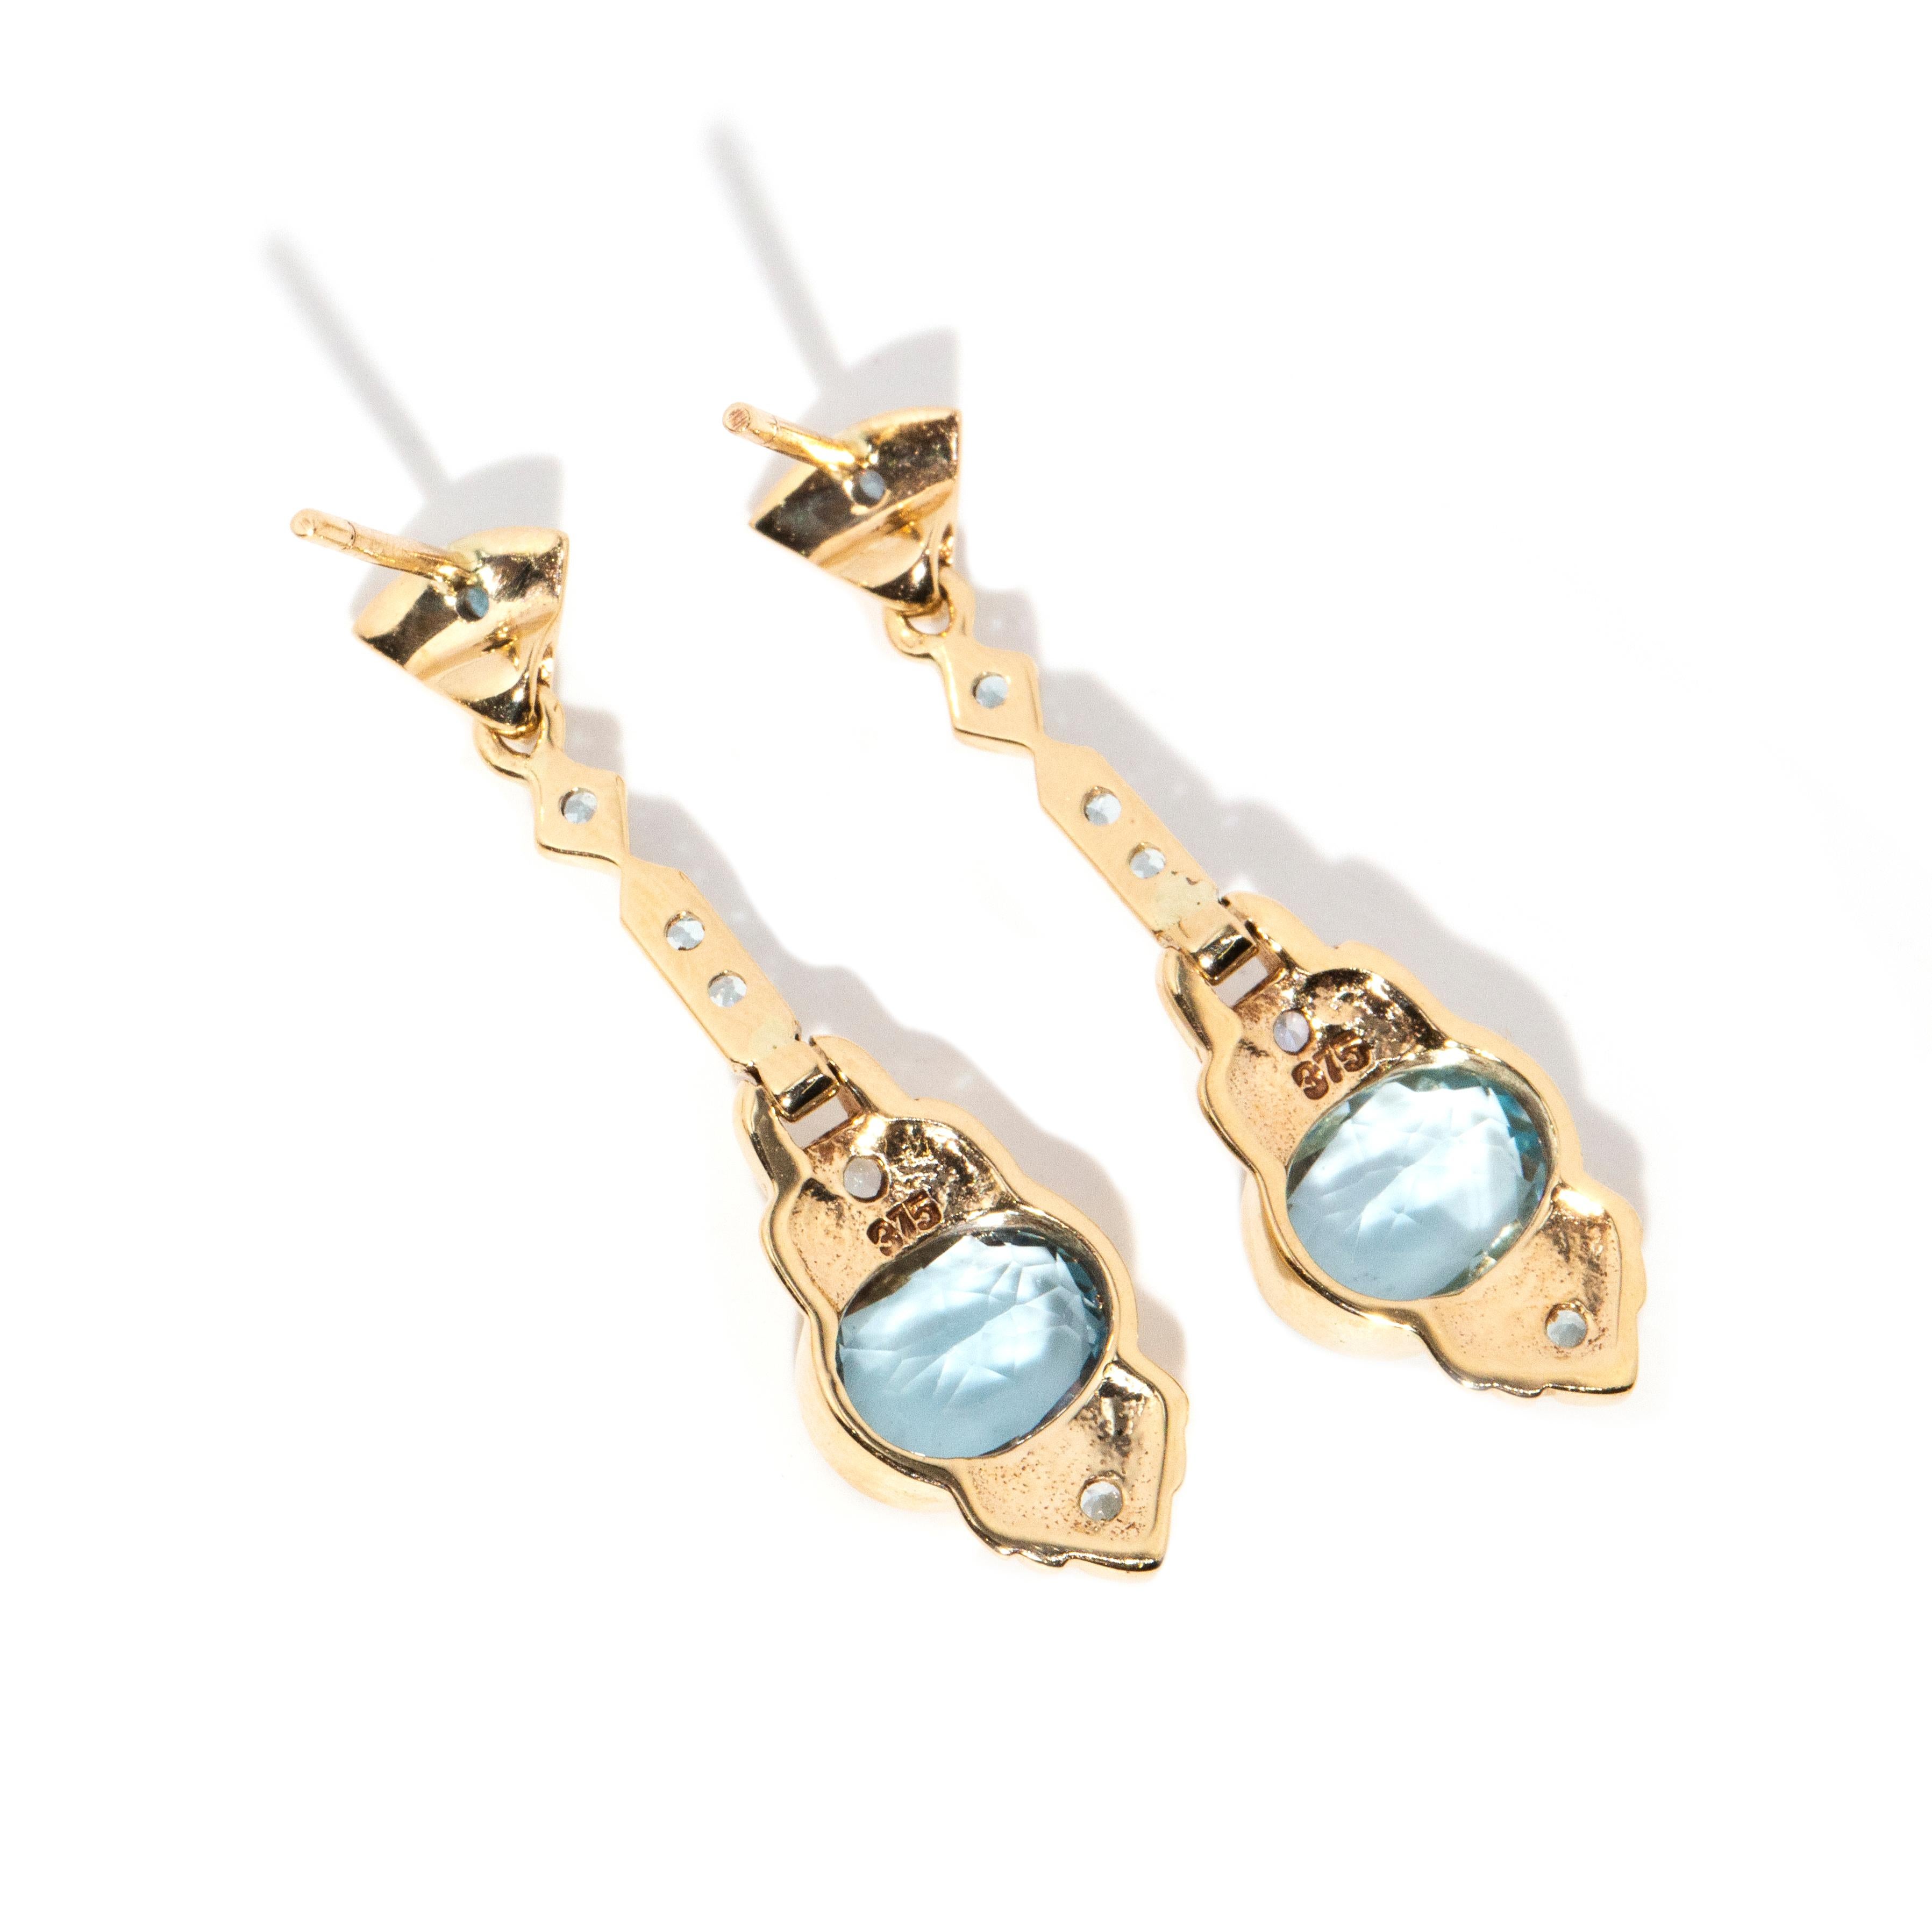 Vintage Inspired Bright Blue Topaz Art Deco Style Drop Earrings 9 Carat Gold For Sale 1